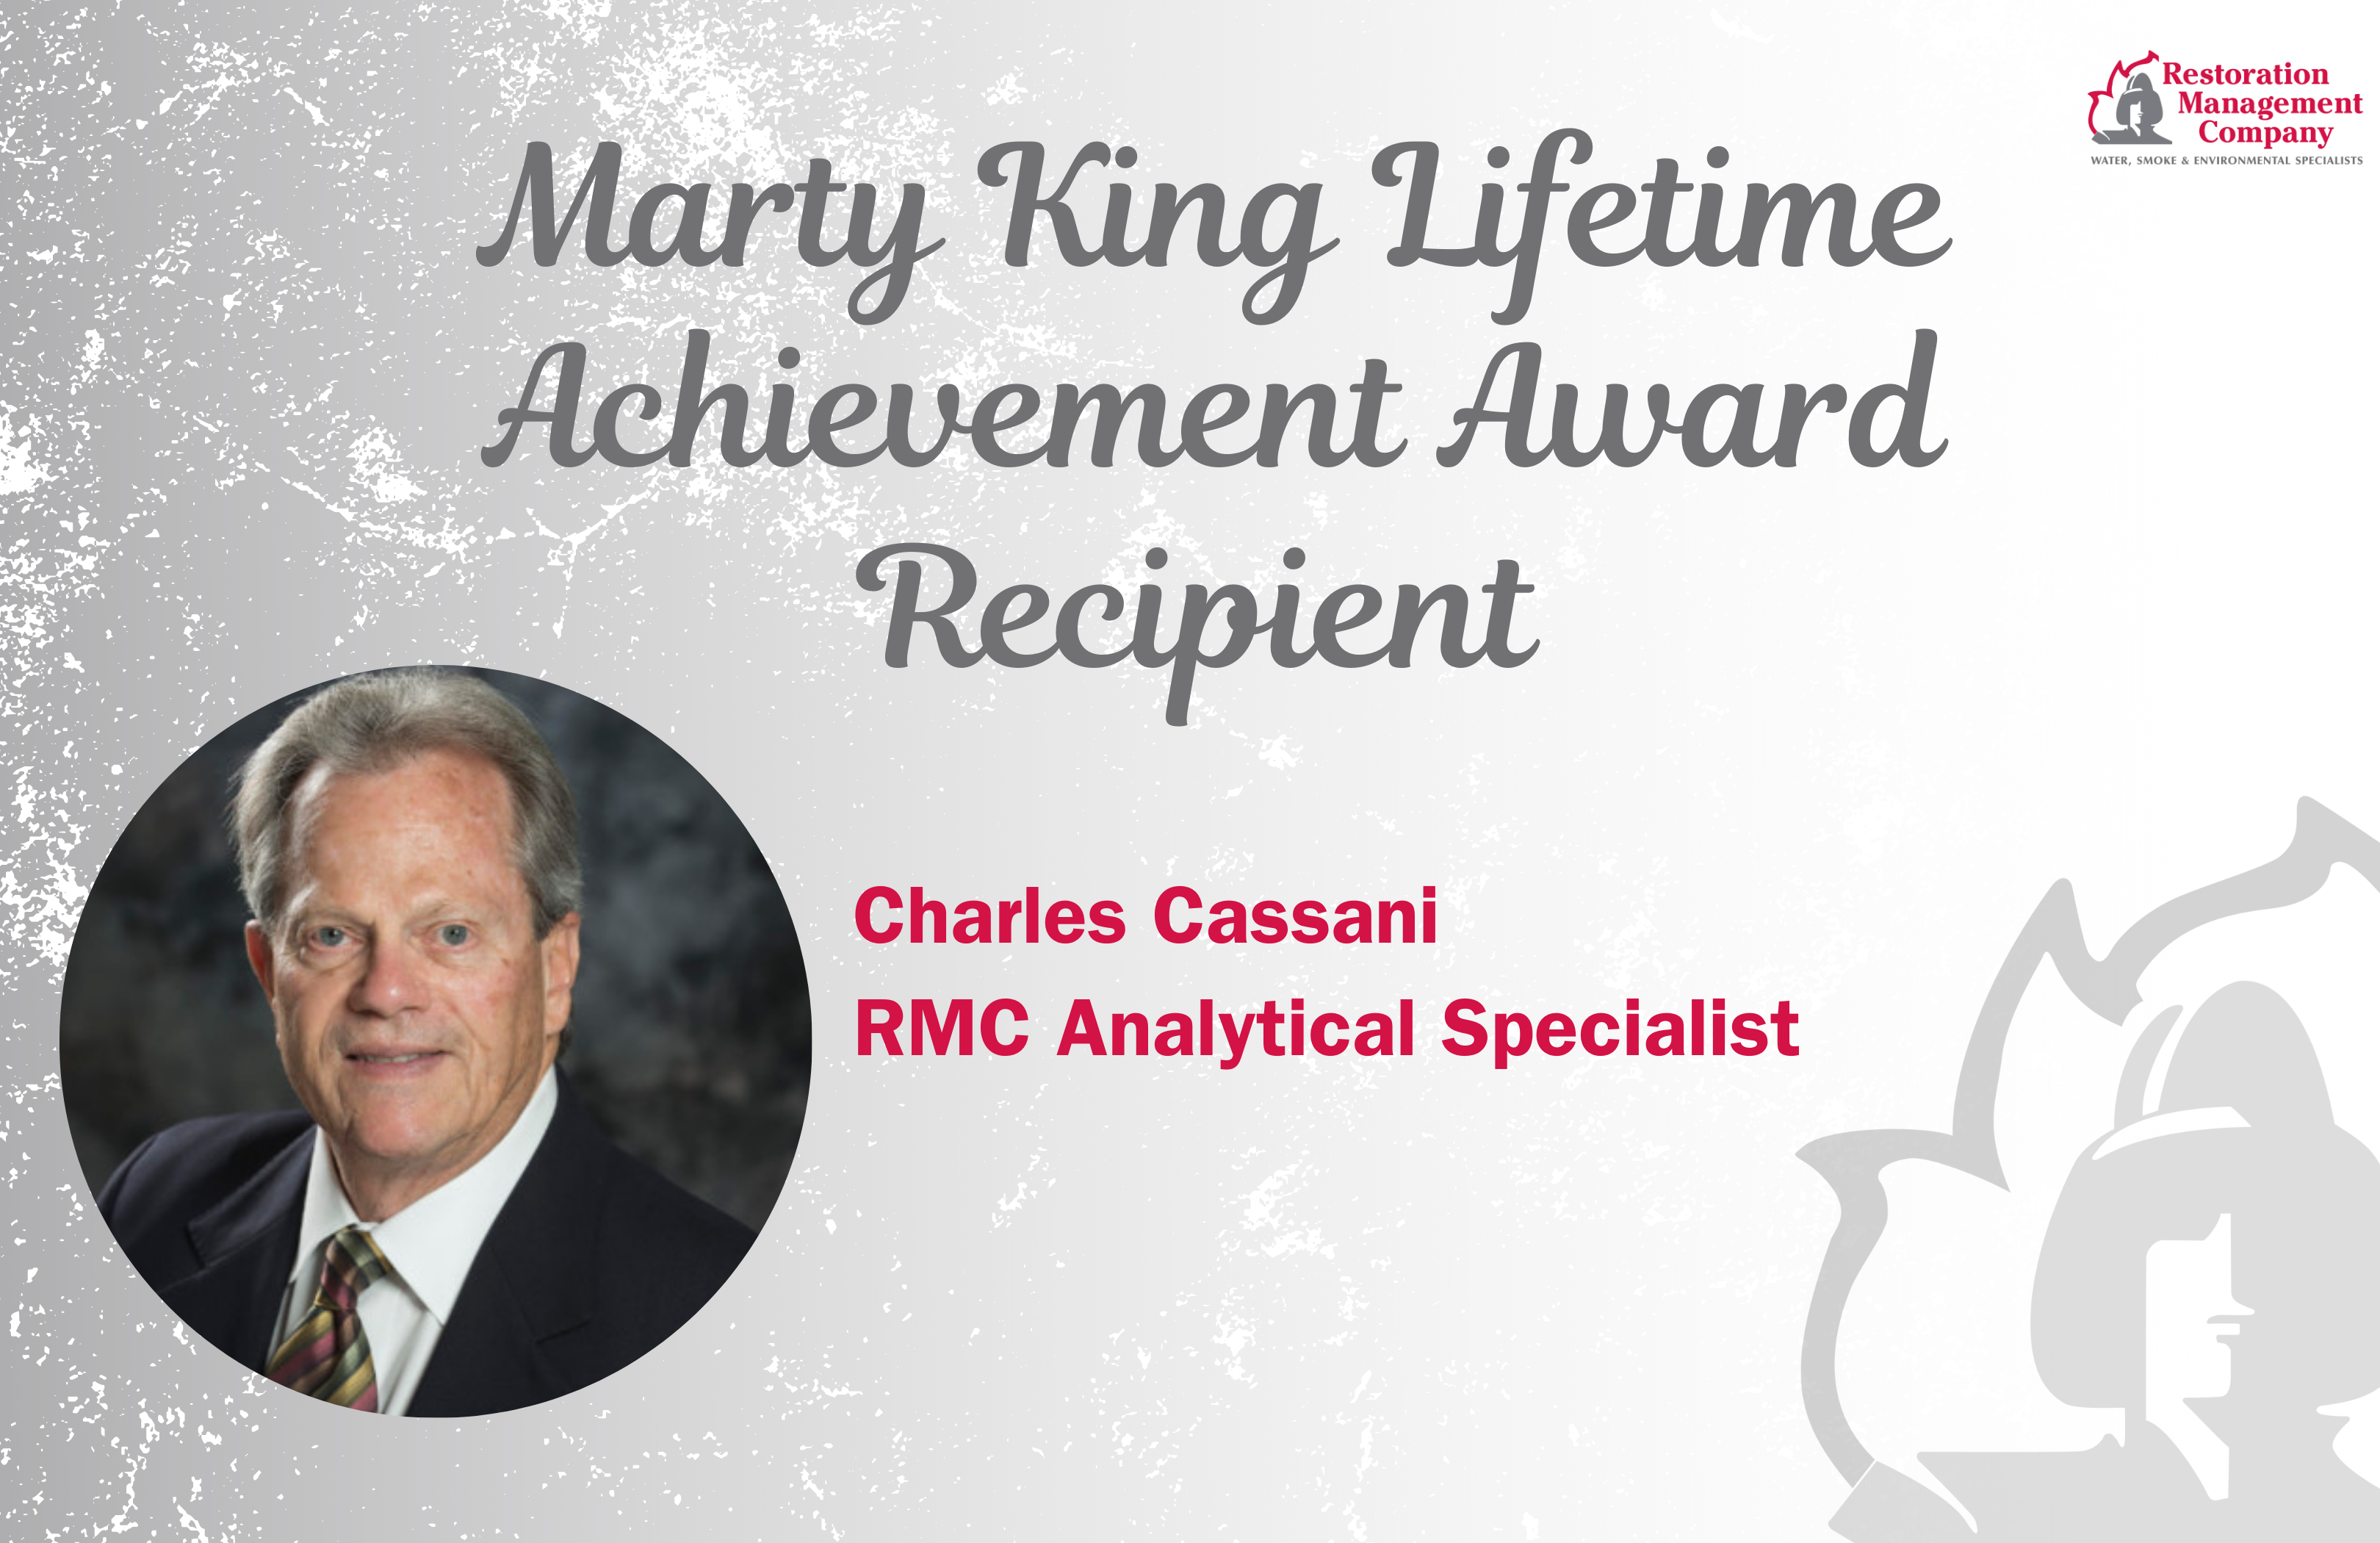 RMC’s Charles Cassani Accepts the Marty King Lifetime Achievement Award!